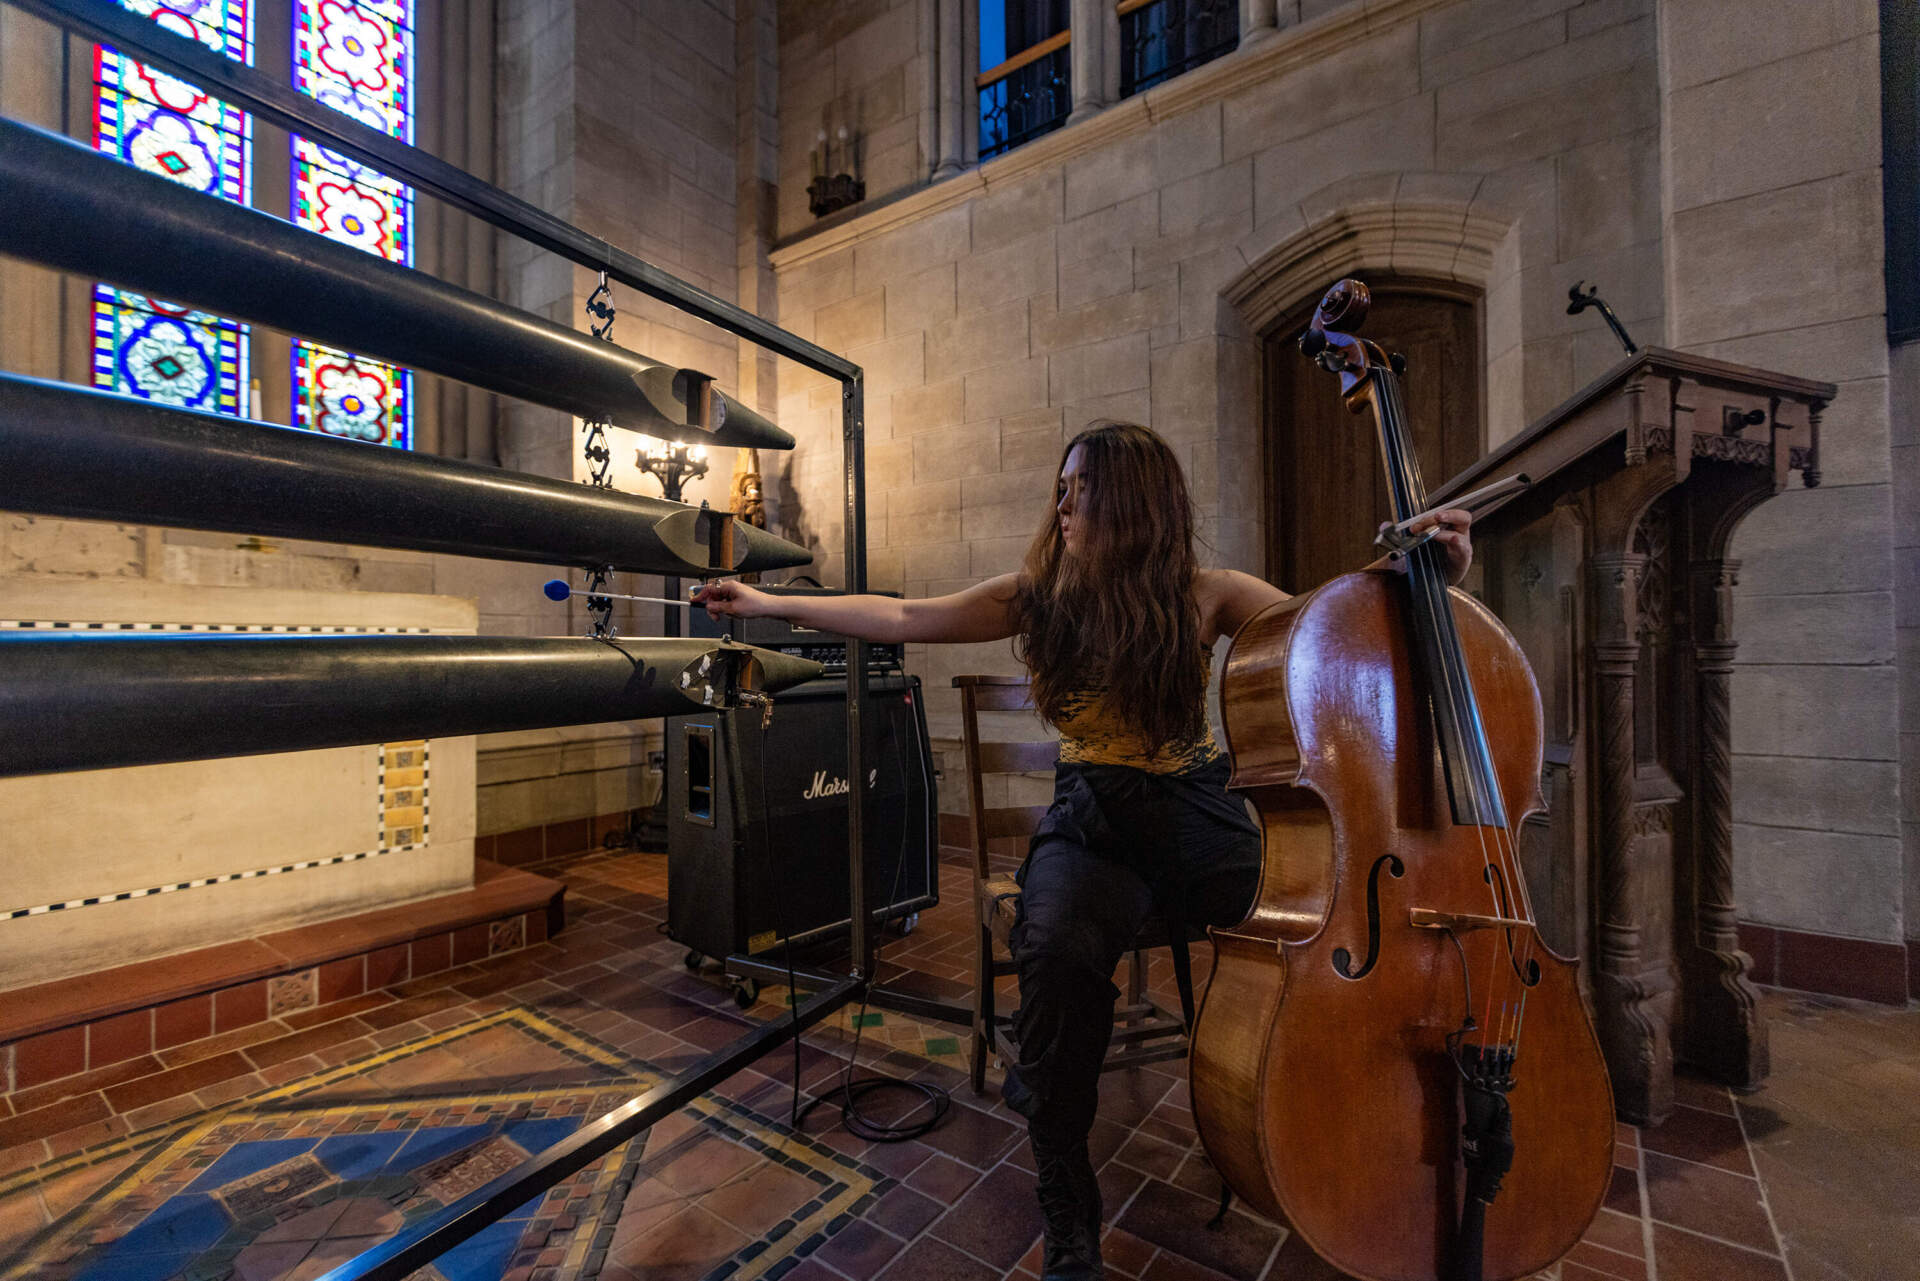 Artist-in-residence Eden Rayz plays the instrument &quot;Argent and Sable&quot; she built from the organ pipes recently removed from Bigelow Chapel. (Jesse Costa/WBUR)